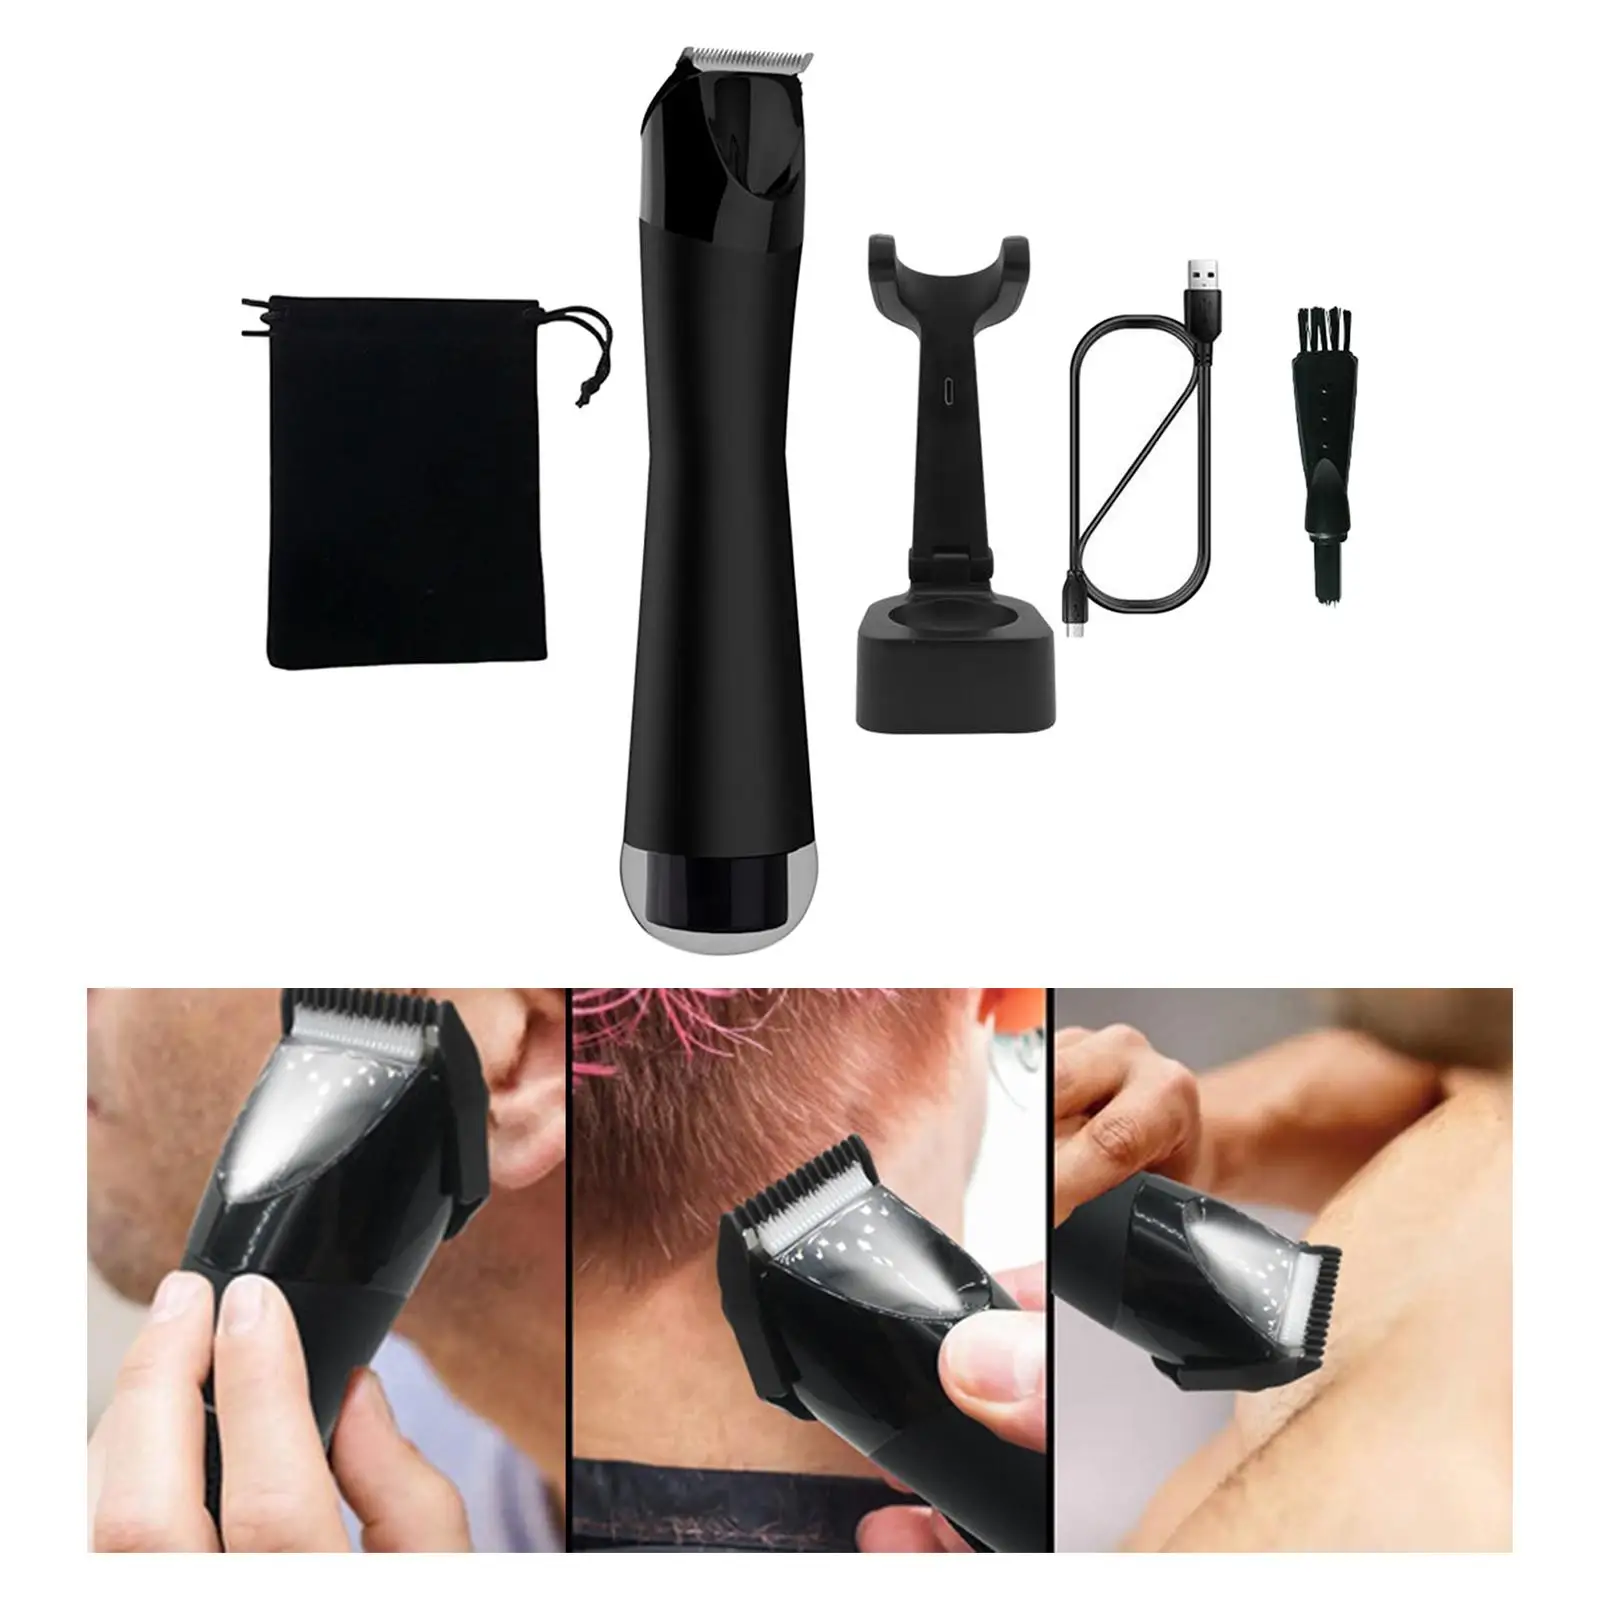 2 in 1 Electric Groin Hair Shaver for Men, USB Charging Lightweight Washable Cordless for Arms Belly Back Male Grooming Tools